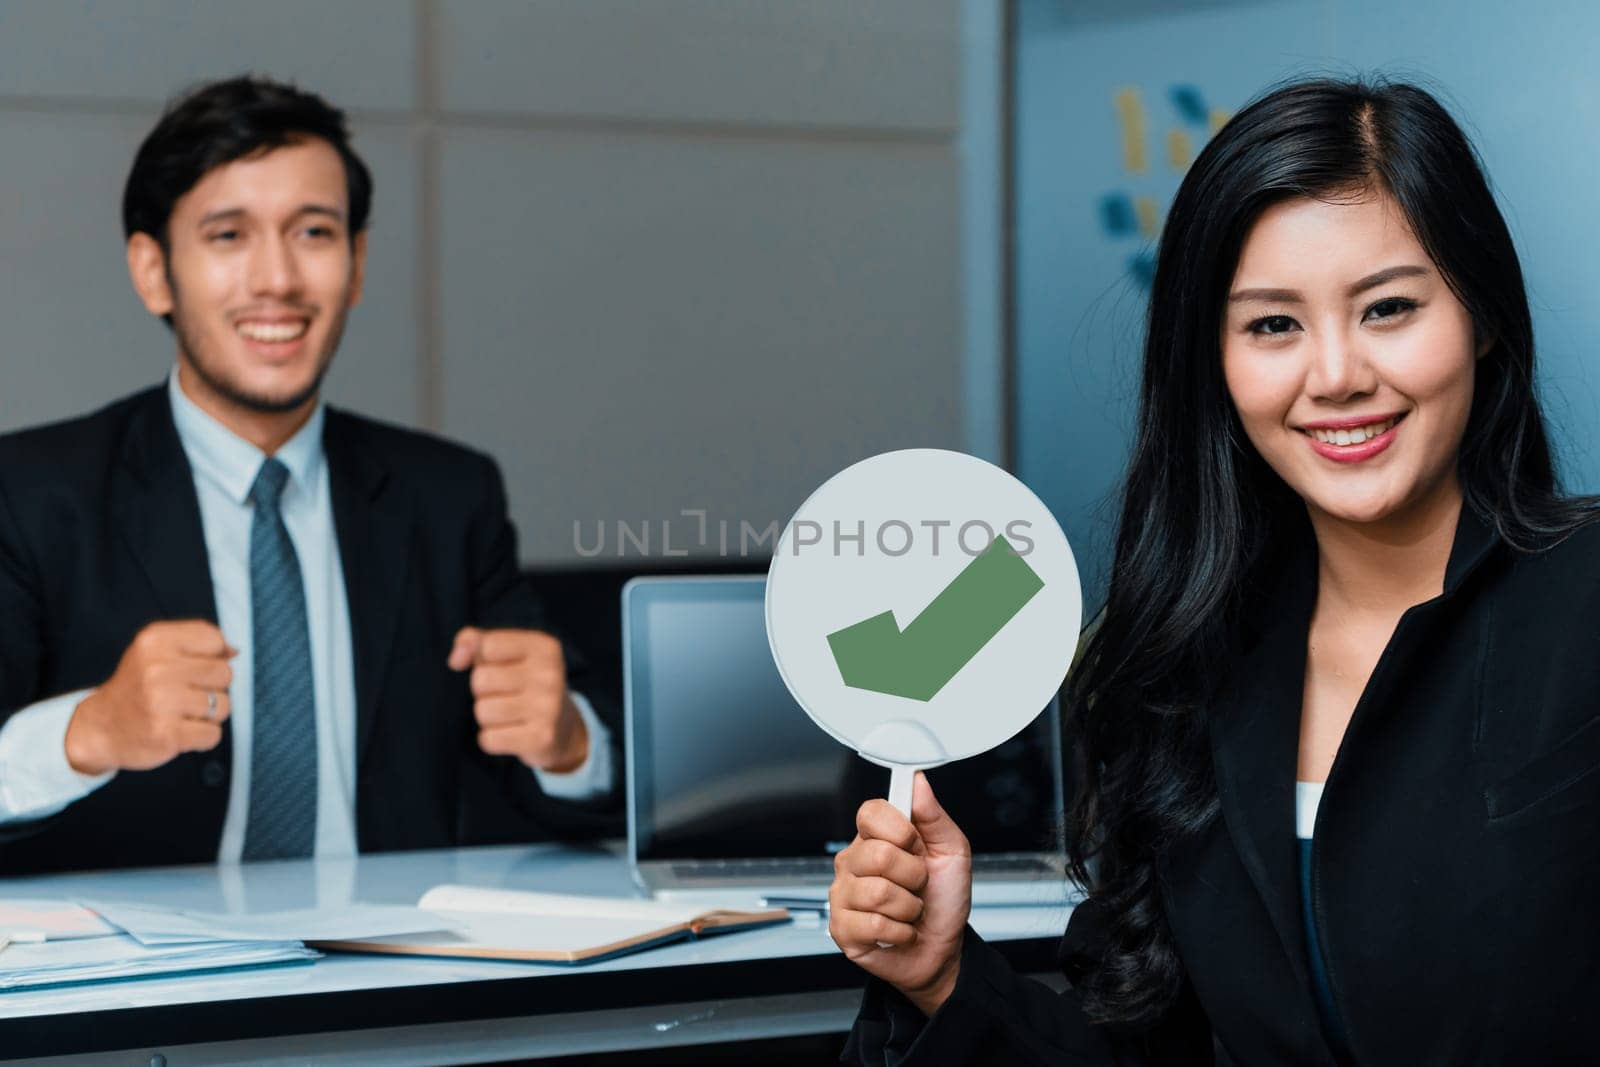 Human resource manager hire male employment candidate who pass interviewing, sitting in office room. Happy OK job interview. Job application, recruitment and Asian labor hiring concept. uds